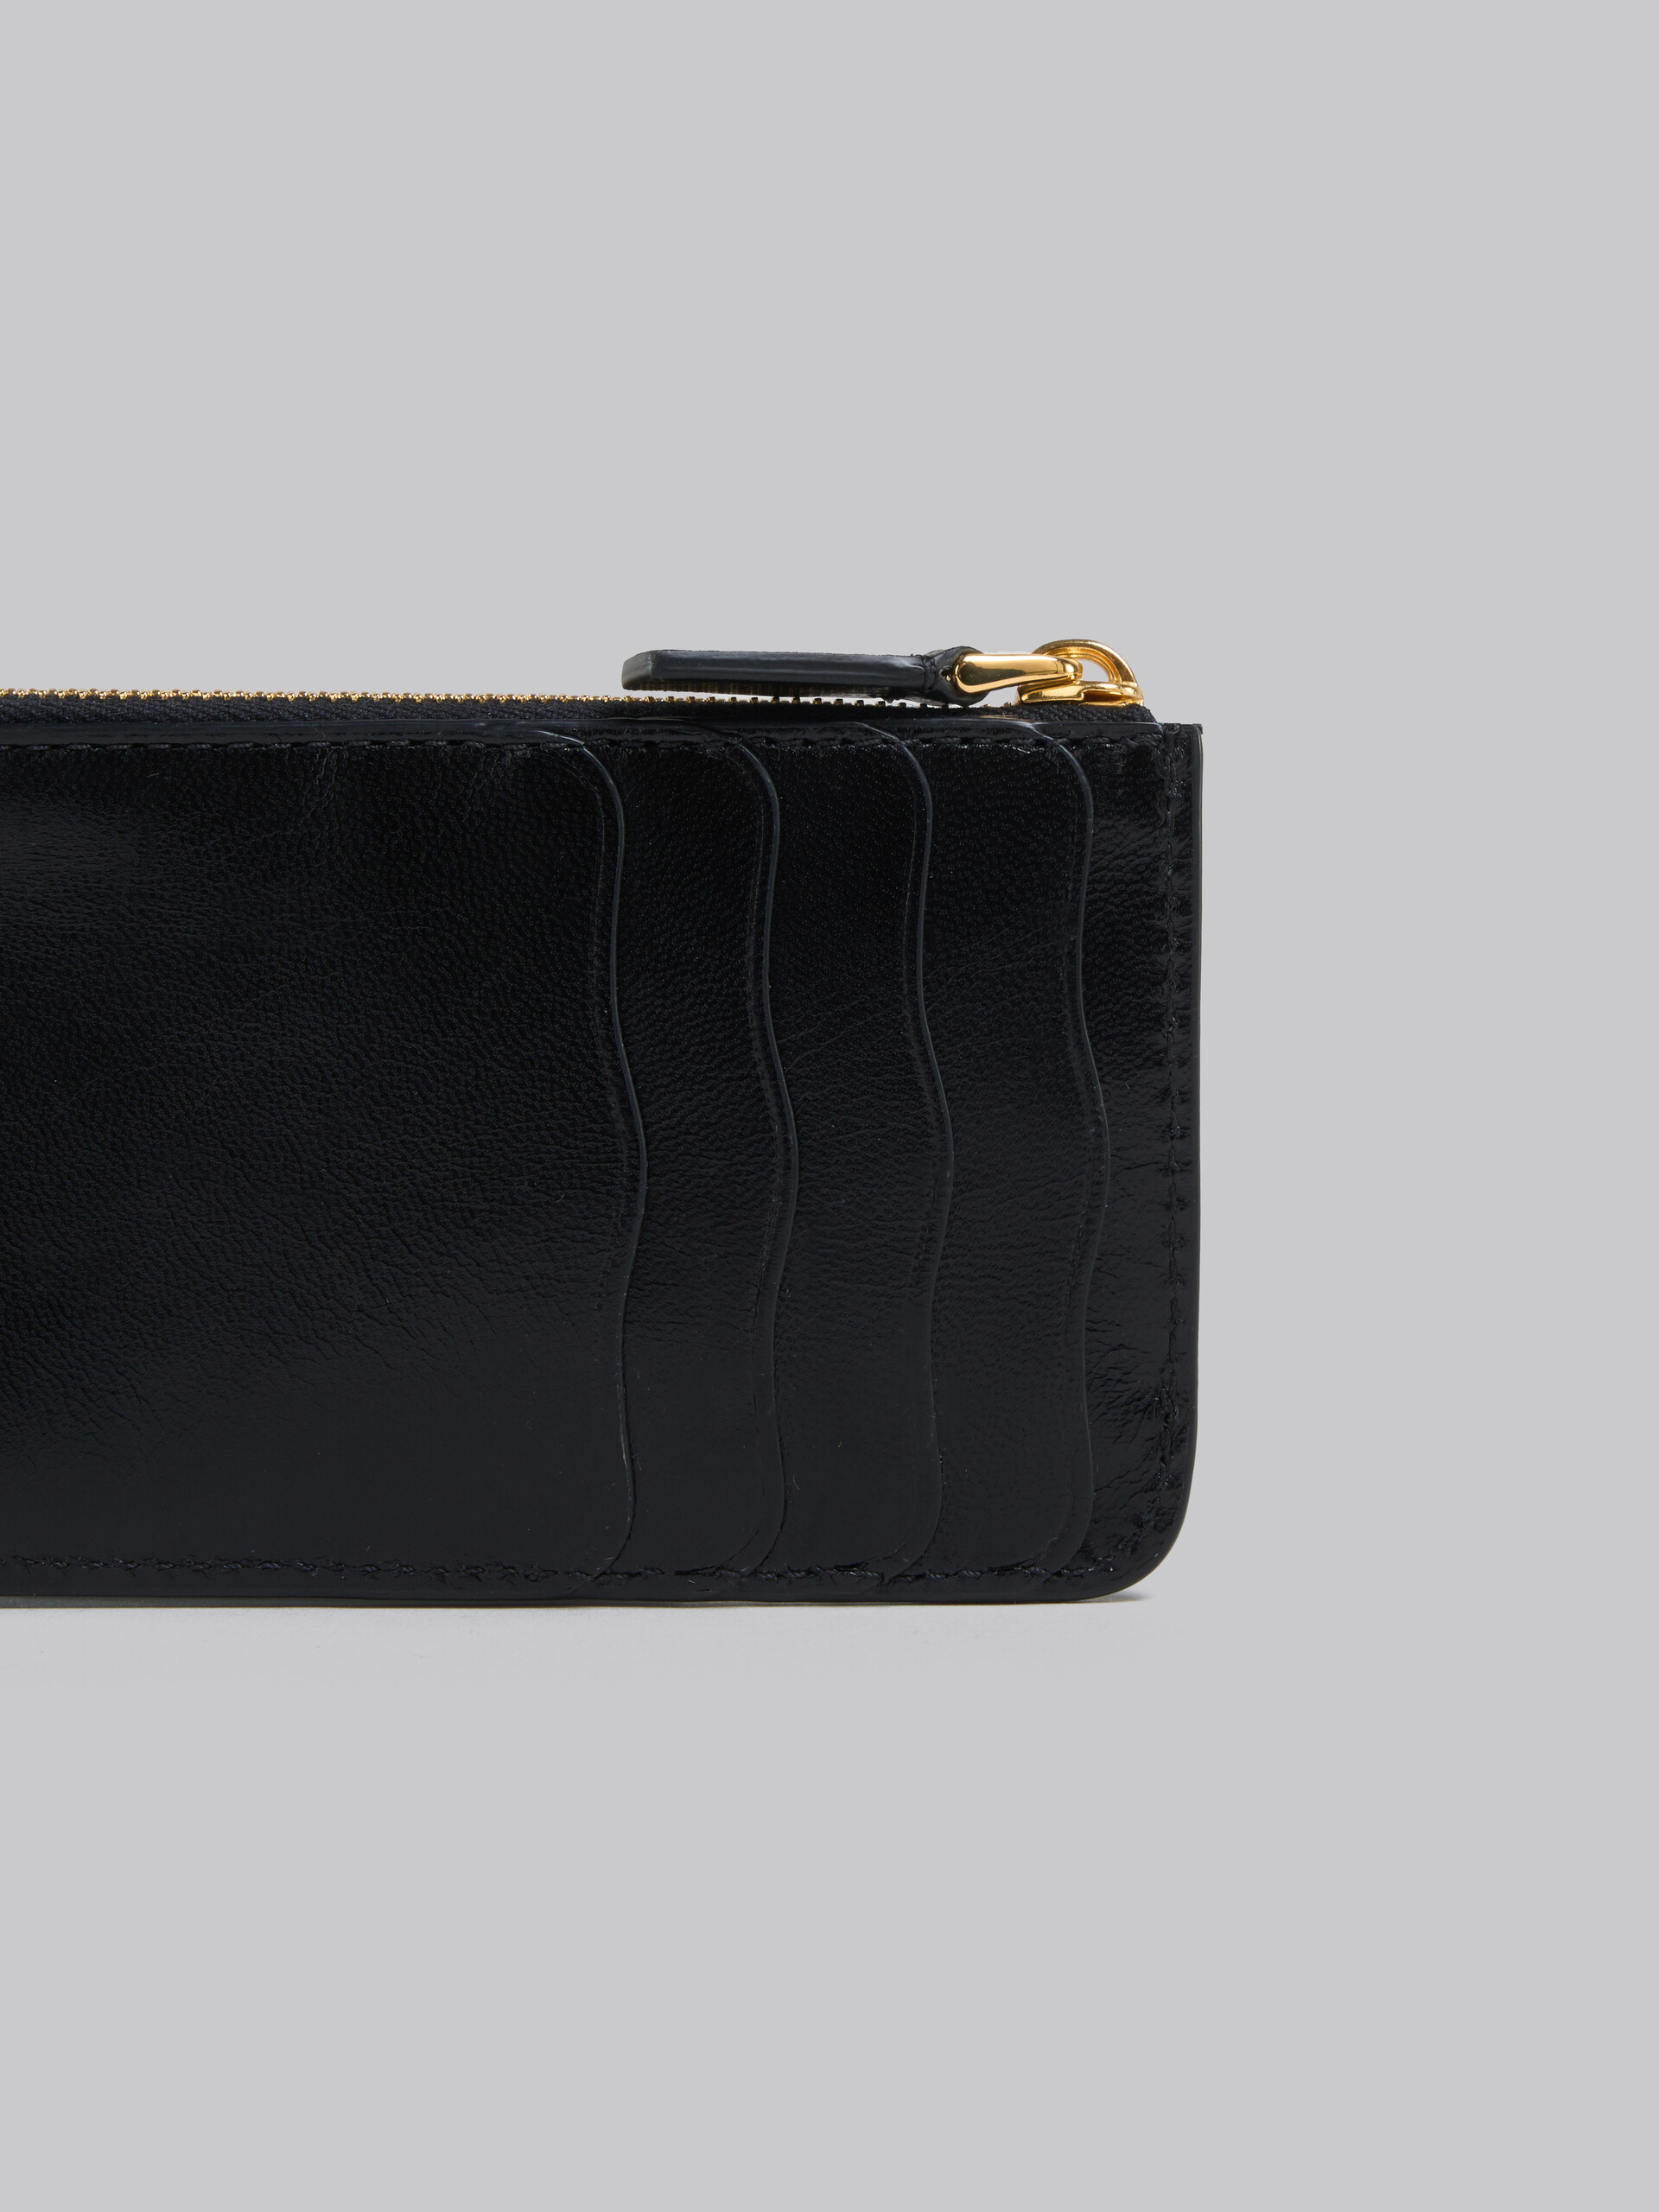 Black leather coin purse with wavy slots - Wallets - Image 4